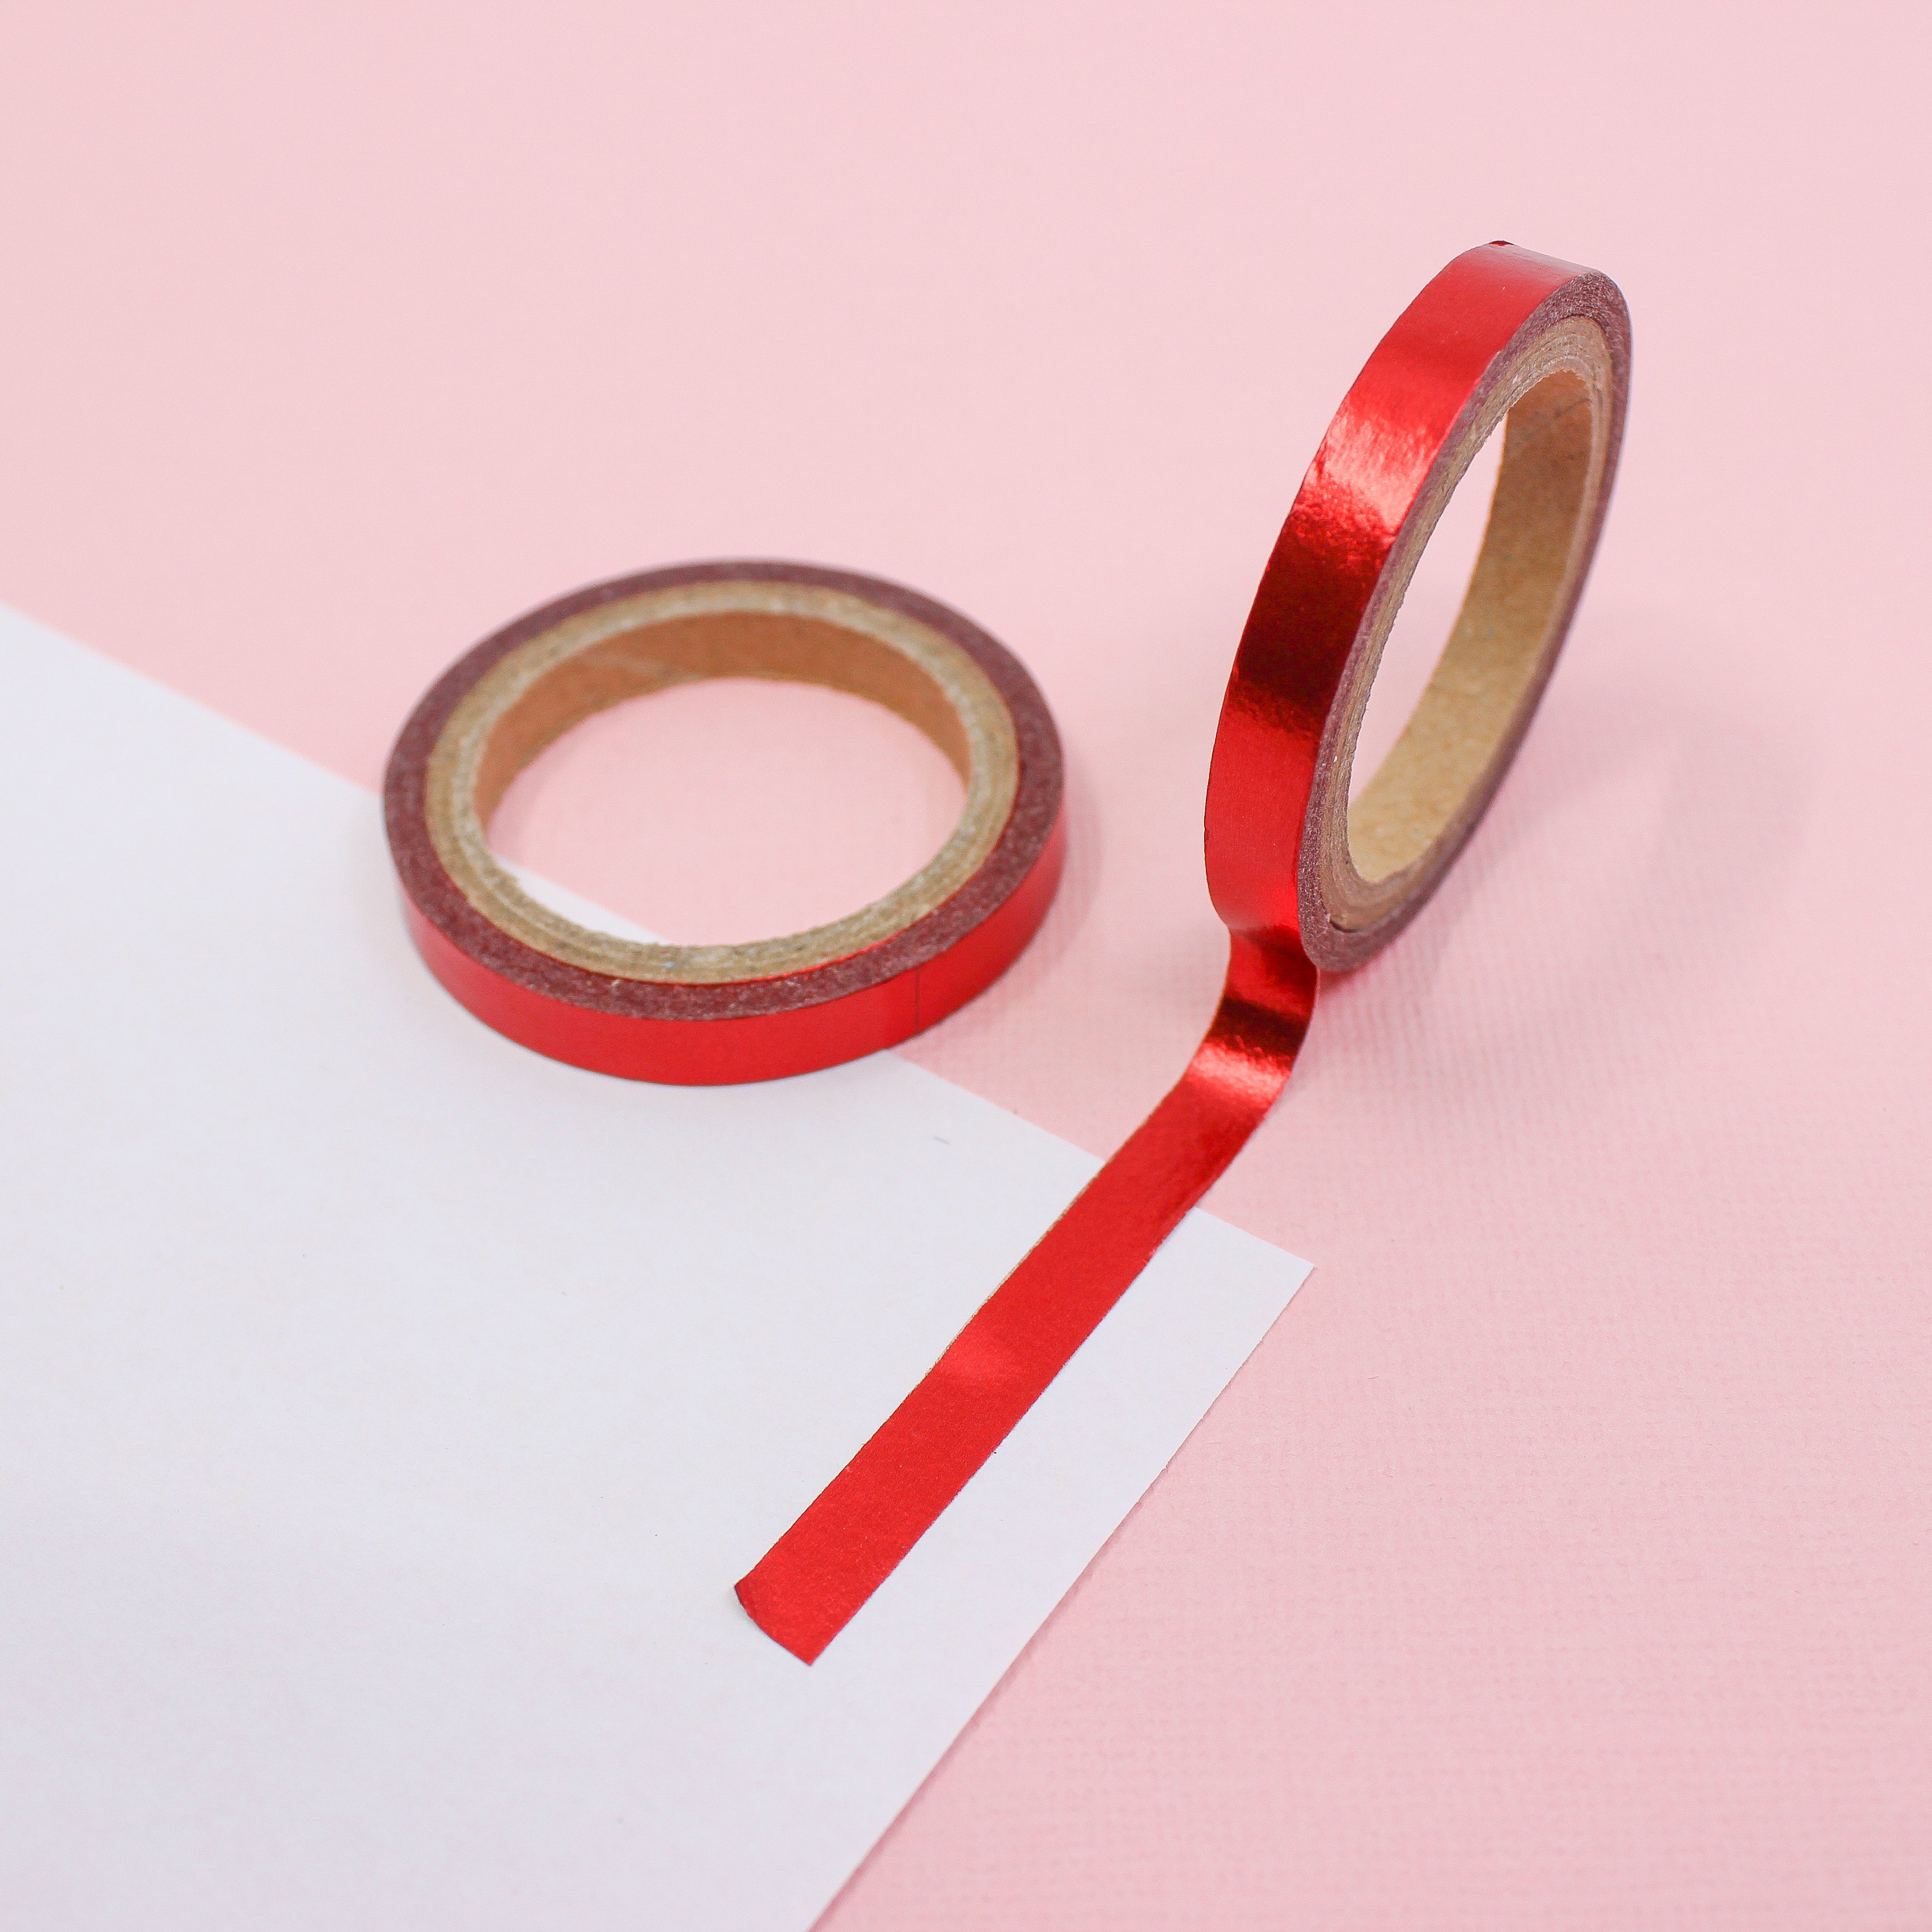 This is a solid red foil with themed washi tape from BBB Supplies Craft Shop